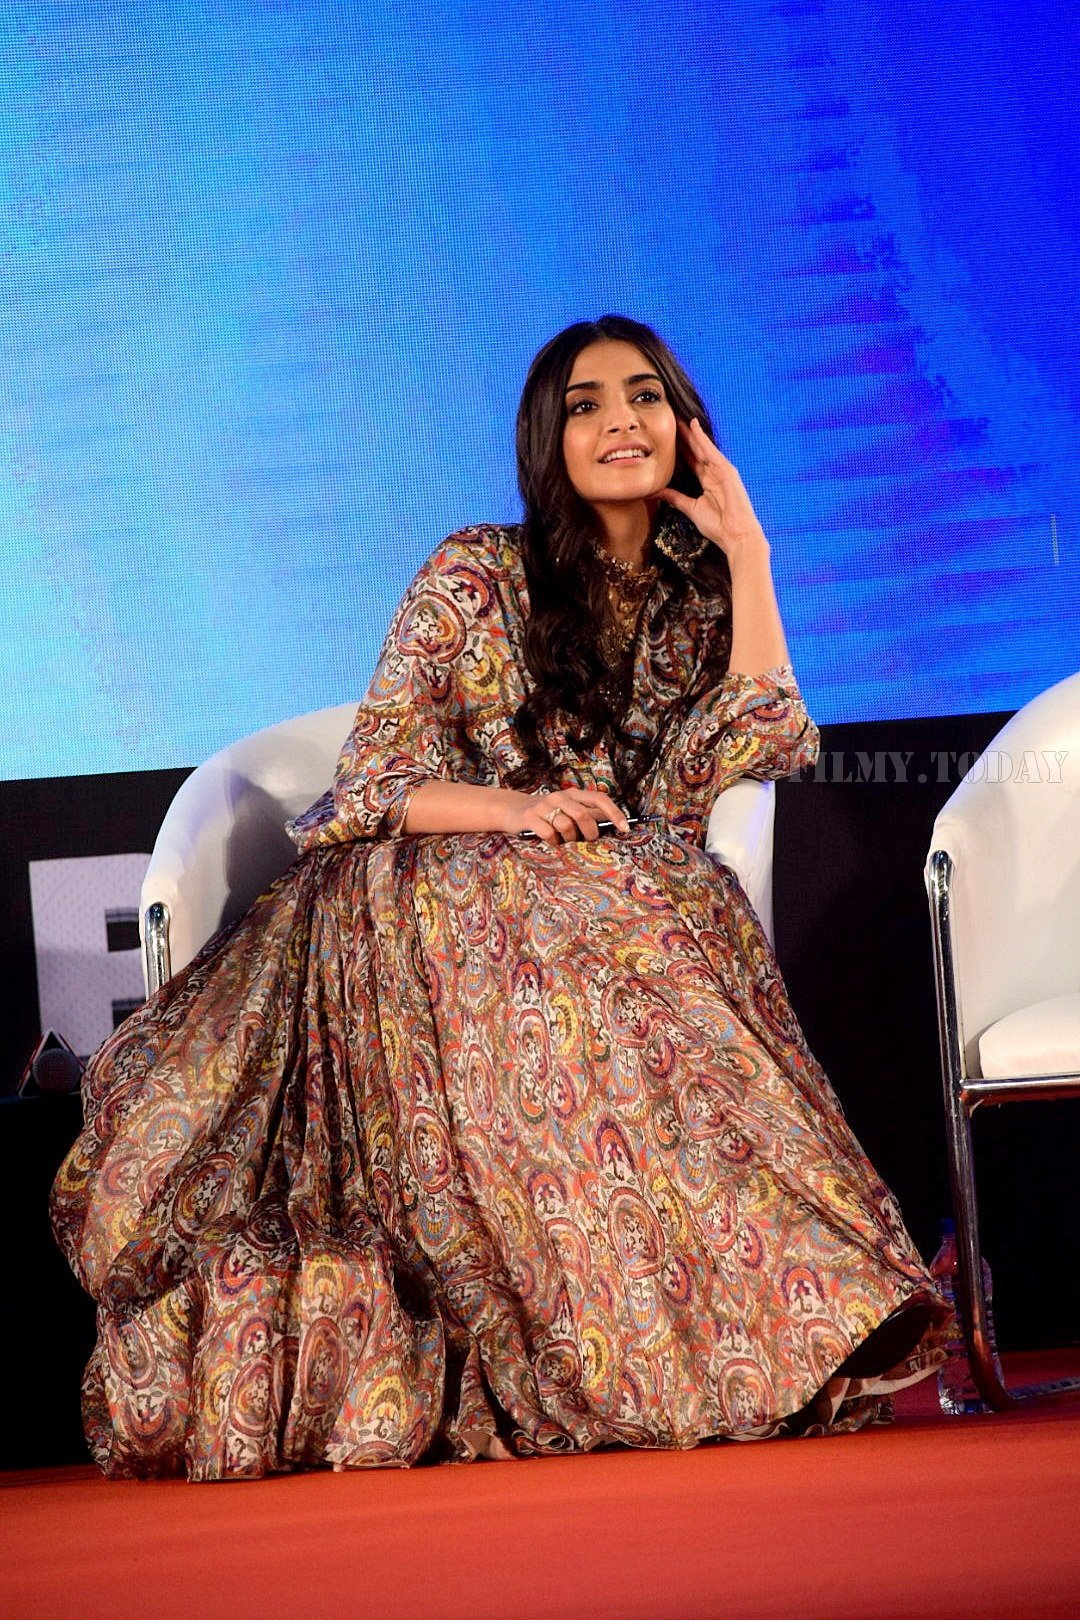 Sonam Kapoor Ahuja - Photos: Promotion Of Pad Man at Innovation Conclave | Picture 1558996